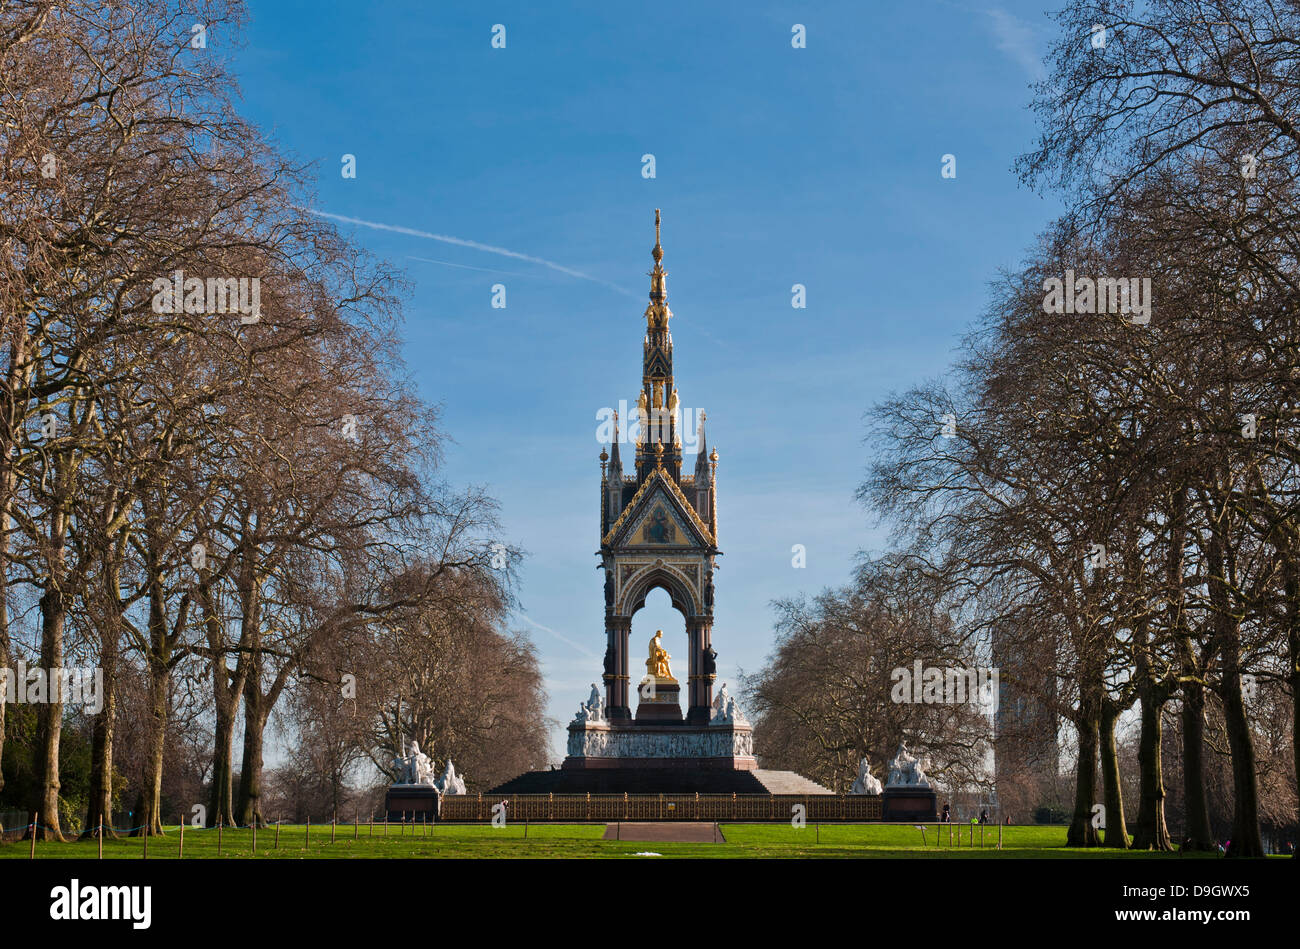 Albert Memorial in Kensington Gardens surrounded by trees in London, England Stock Photo